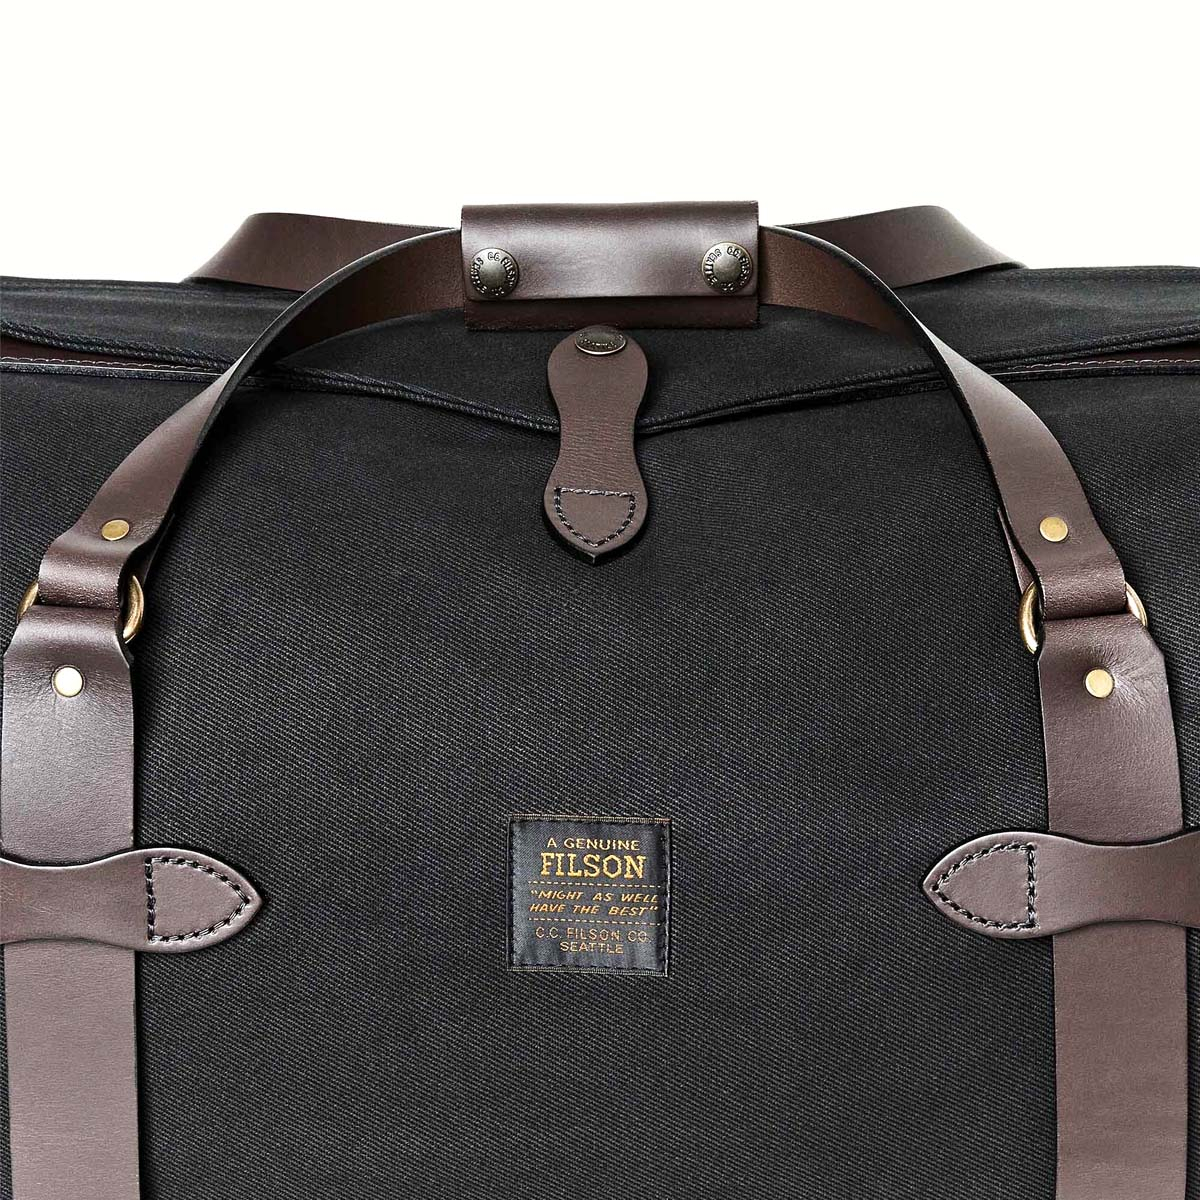 Filson Rugged Twill Duffle Bag Medium Black, perfect for a weekend away or a small business-trip